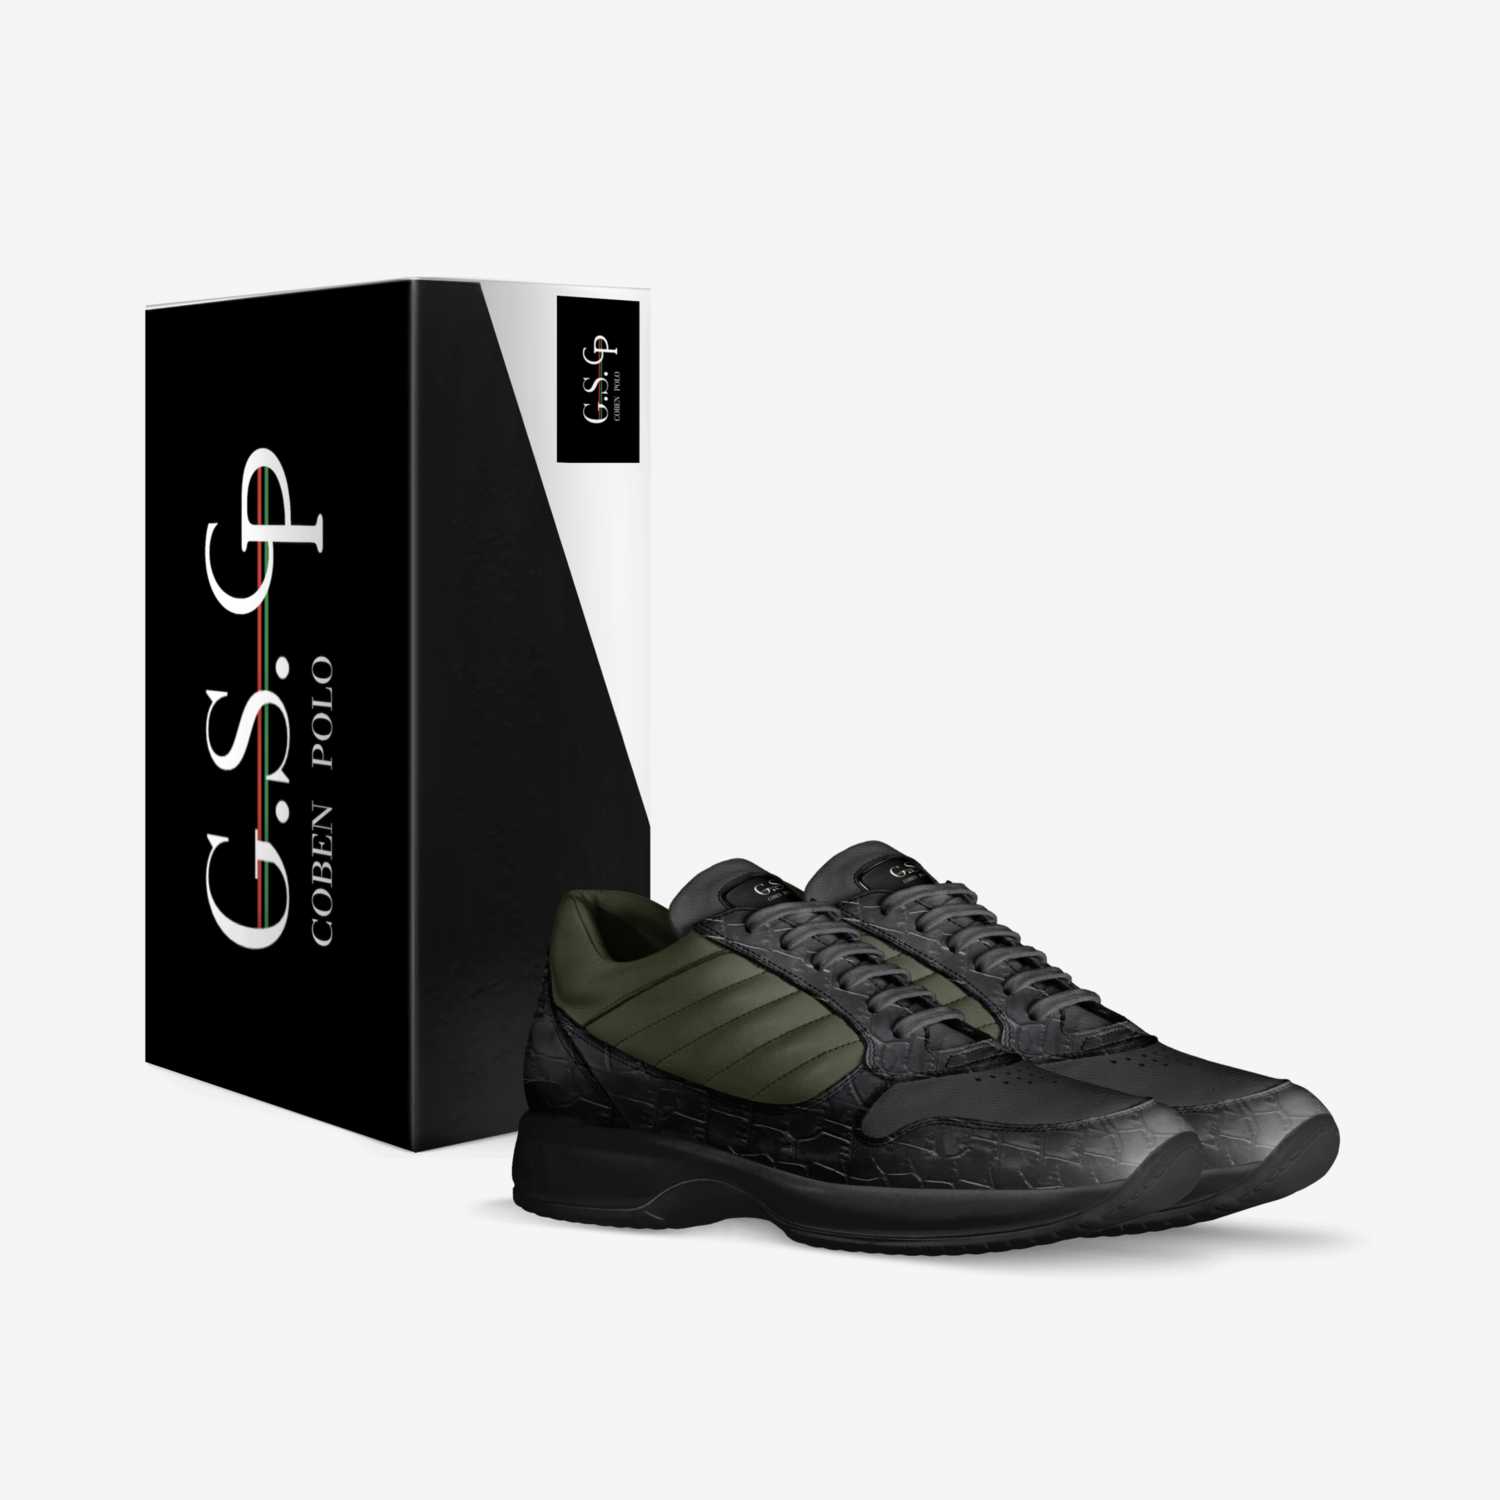  GSCp custom made in Italy shoes by Costa Cobenpolo | Box view